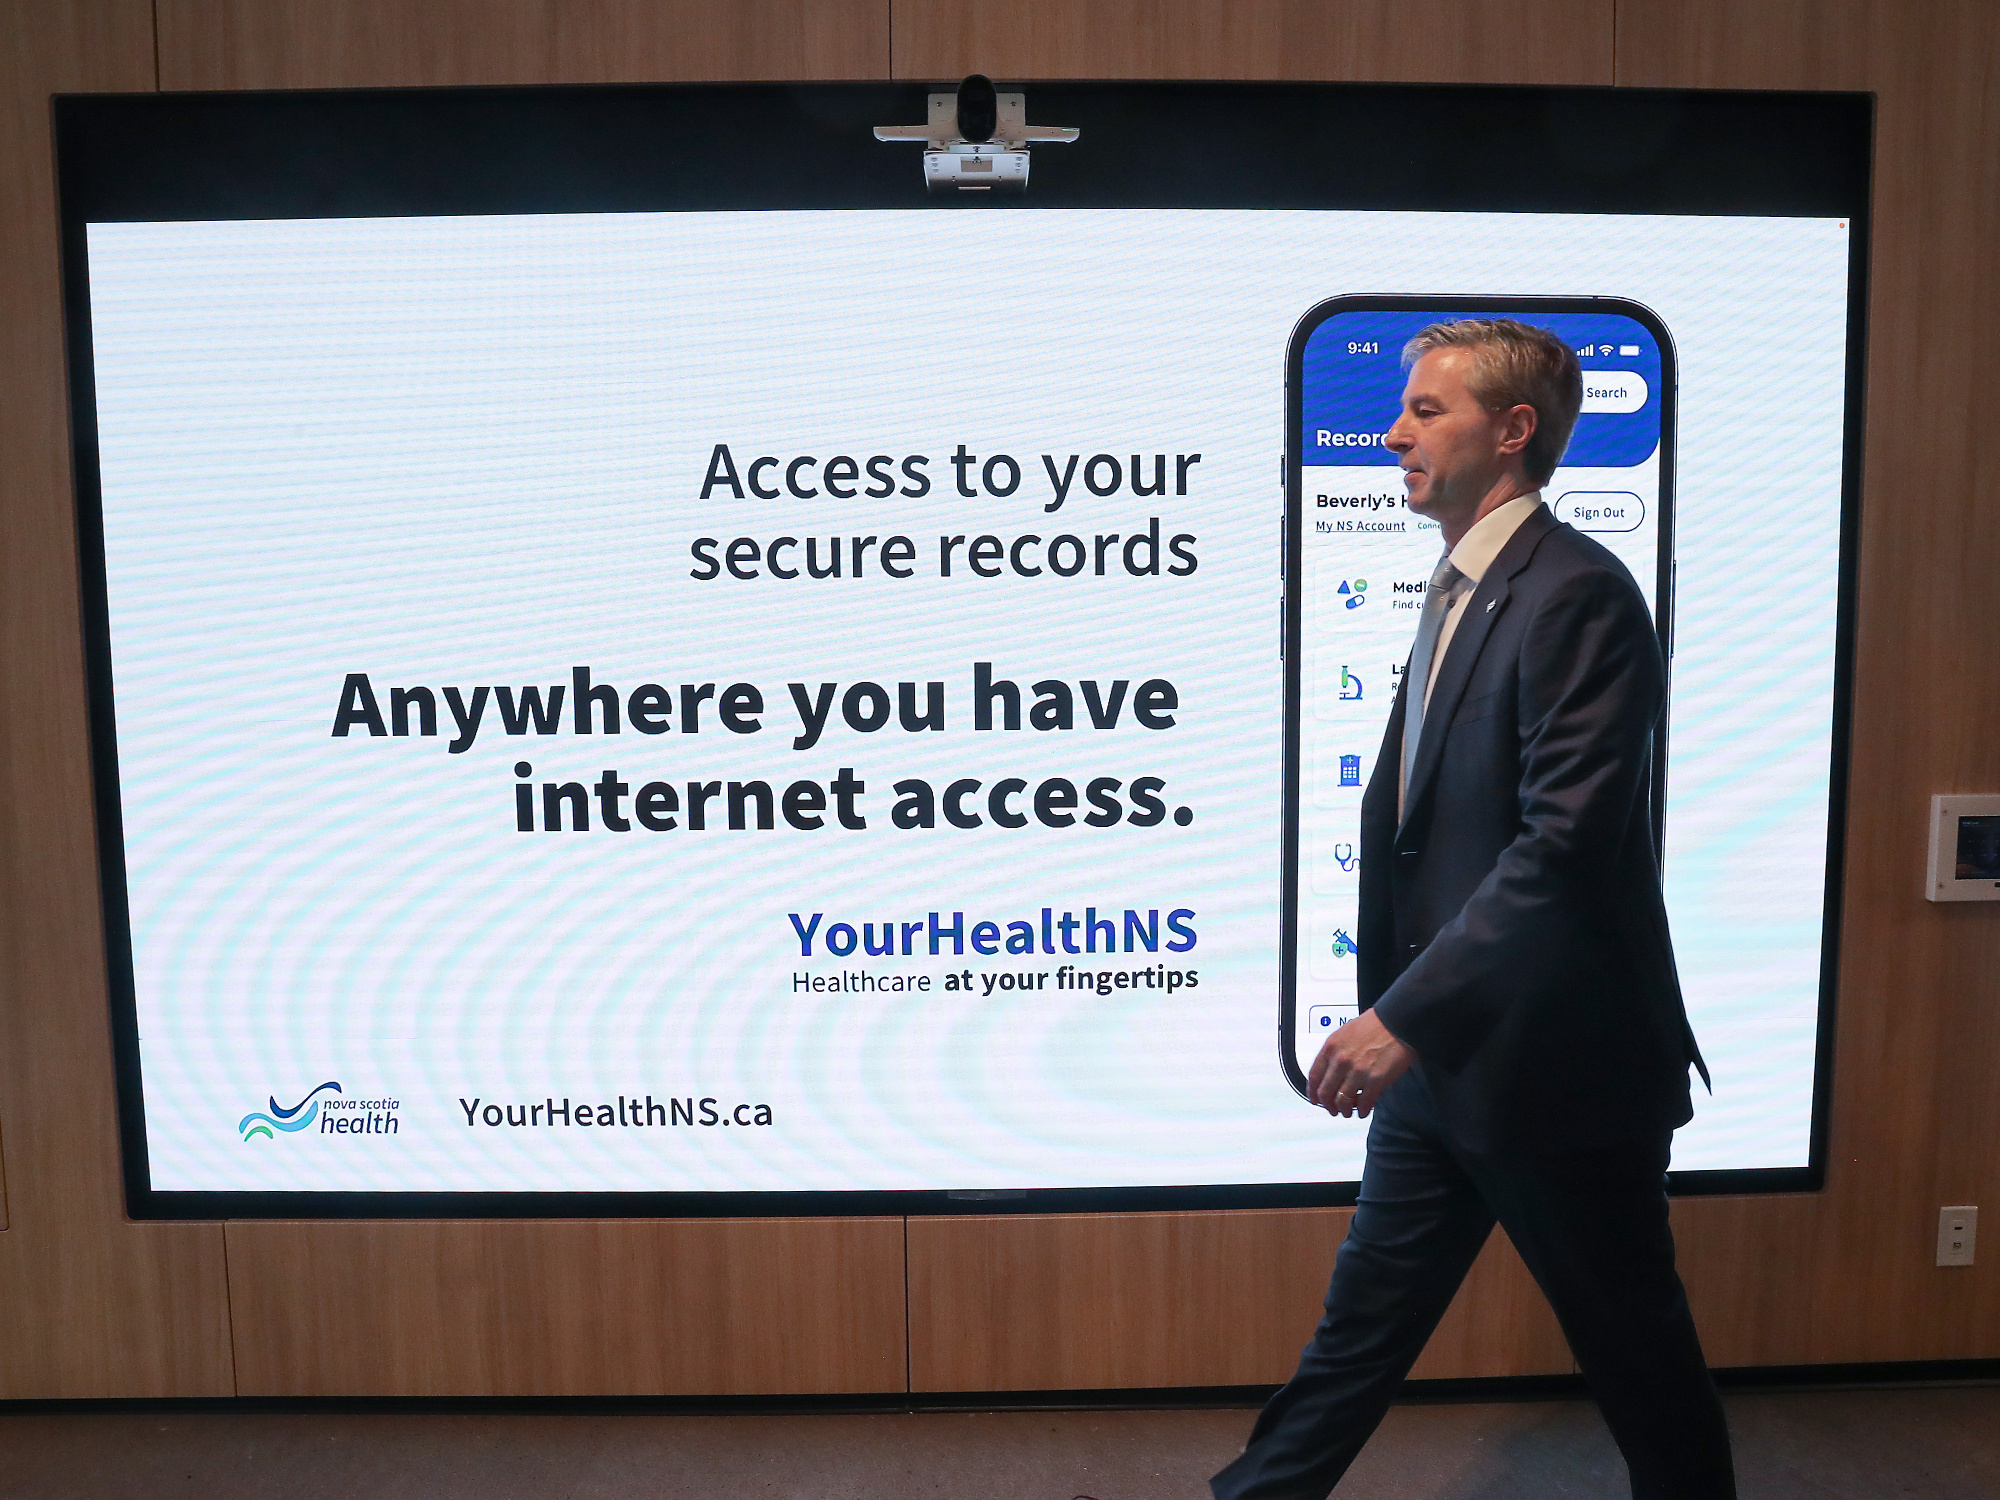 Photo of Tim Houston walking in front of a screen showing information about access to records on YourHealthNS